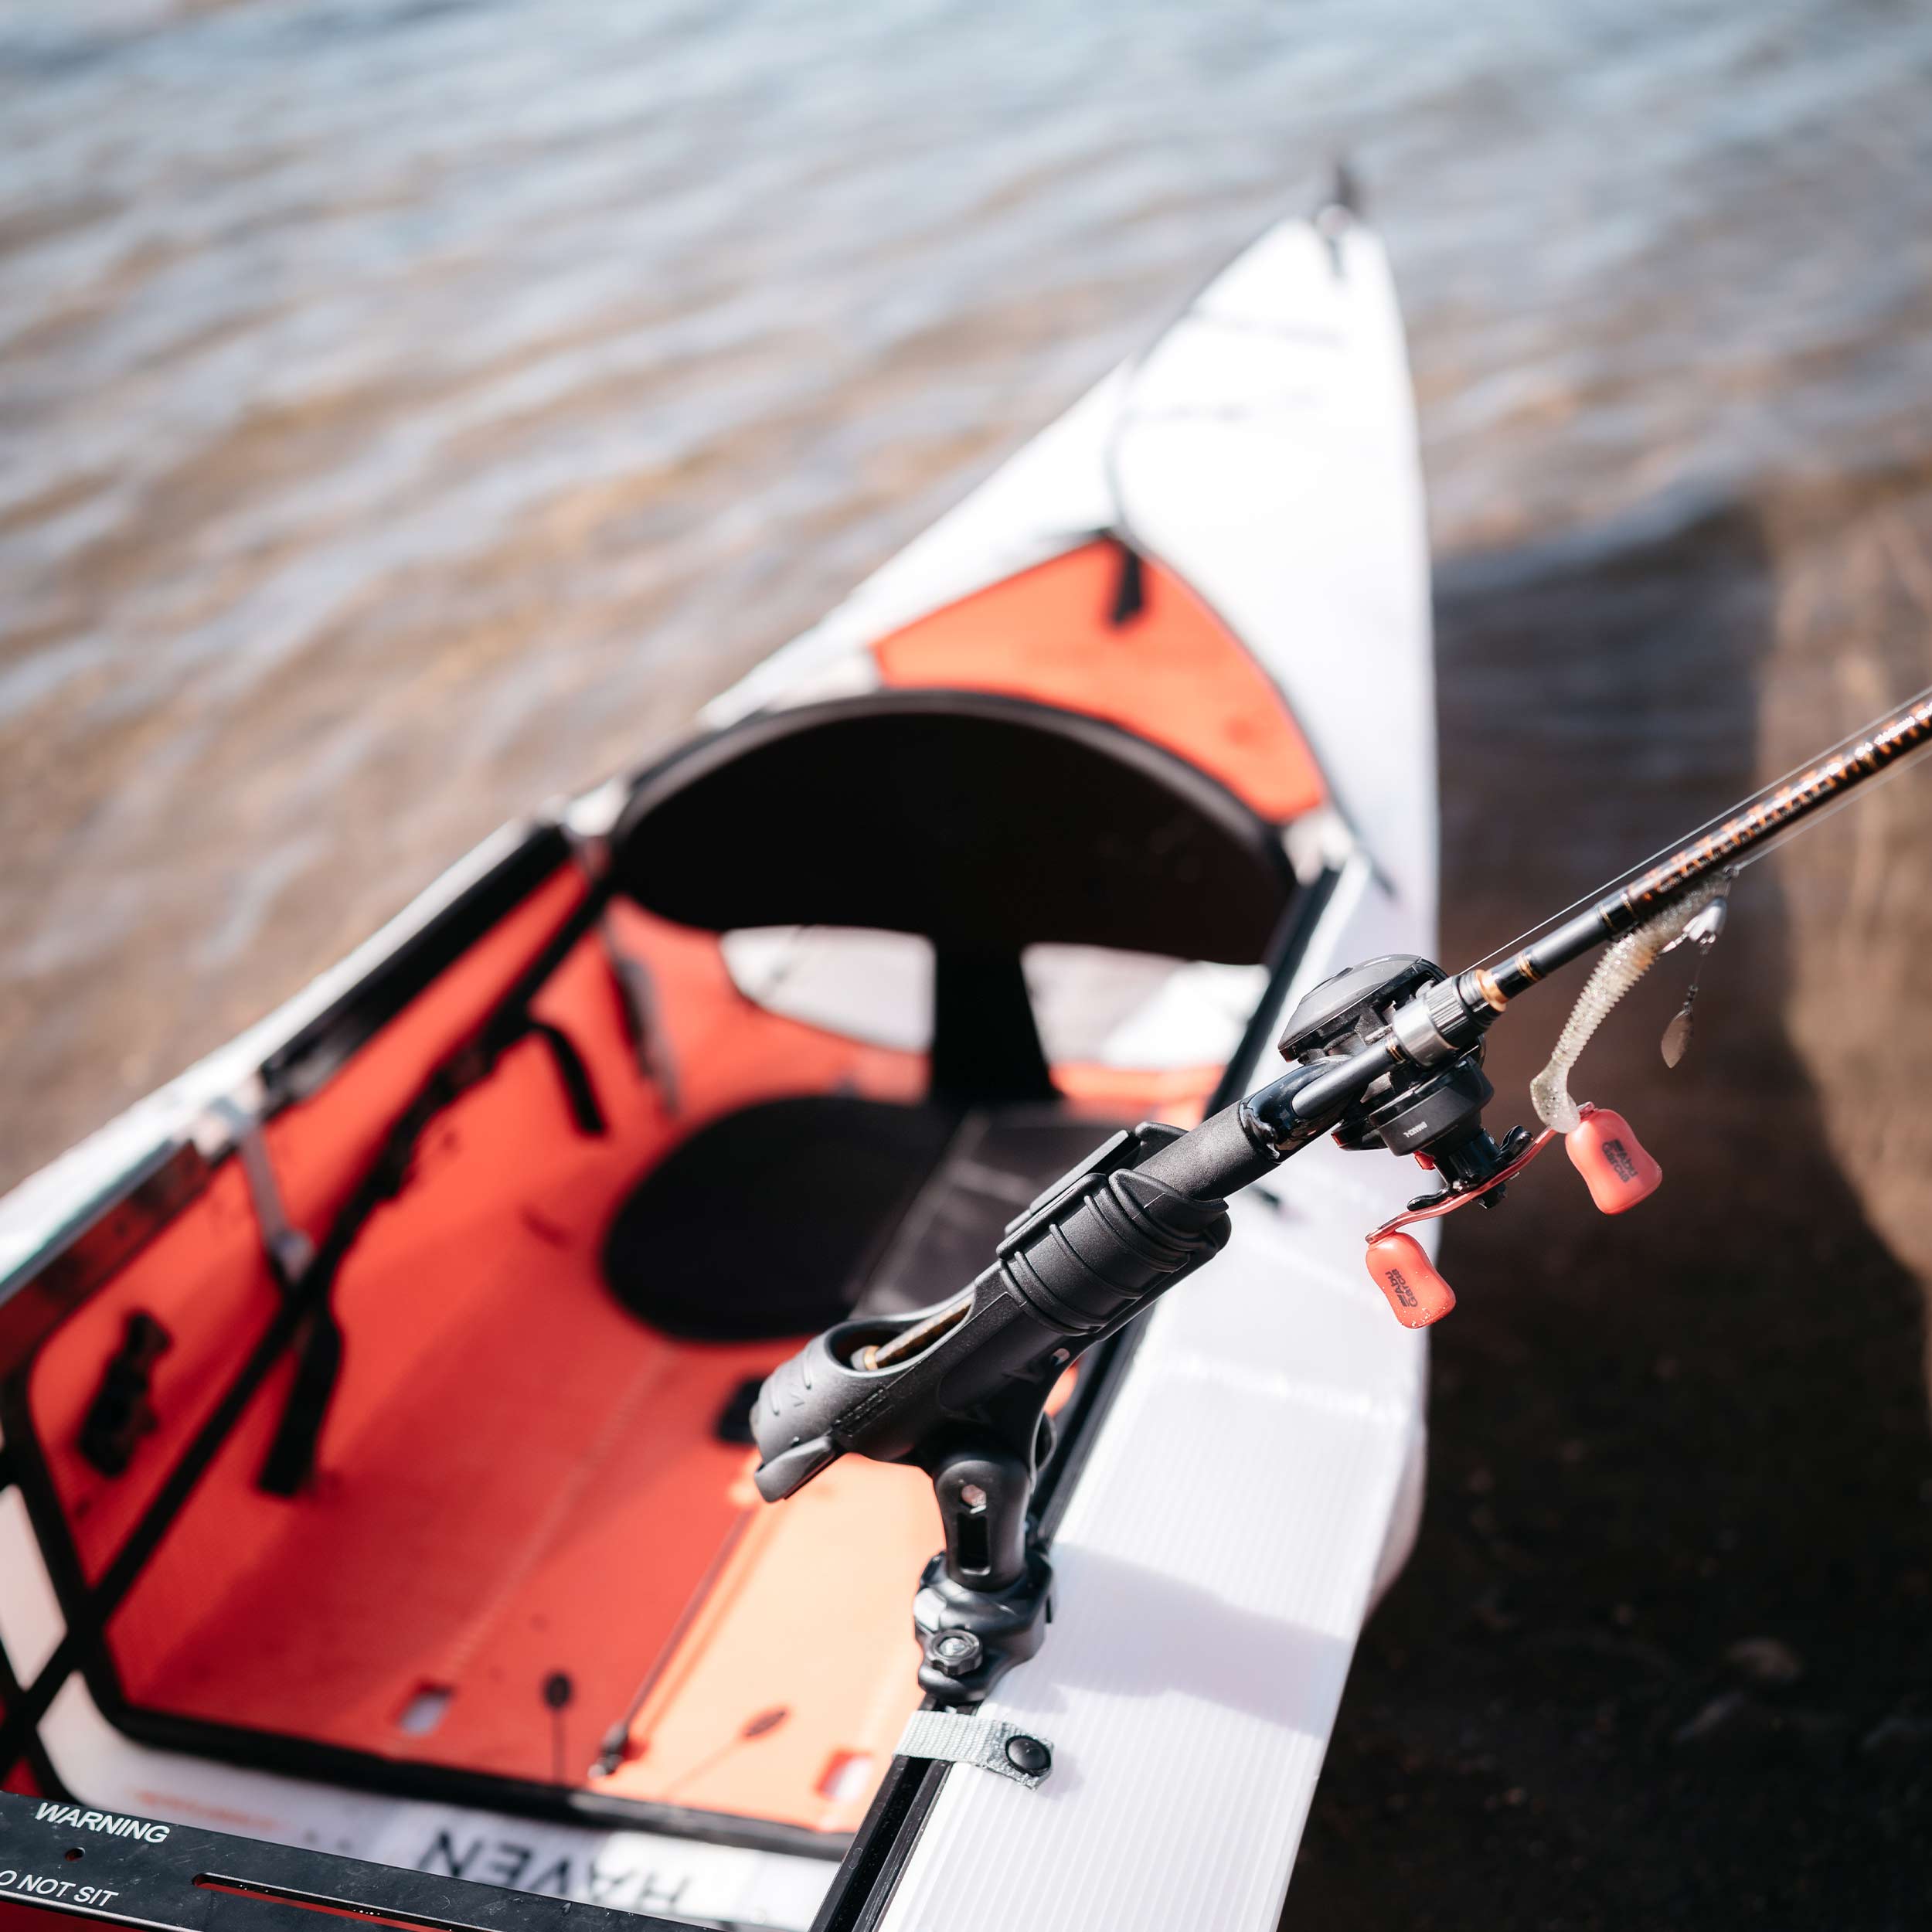 How To Install Rod Holders For An Inflatable Kayak? Anchor, 50% OFF